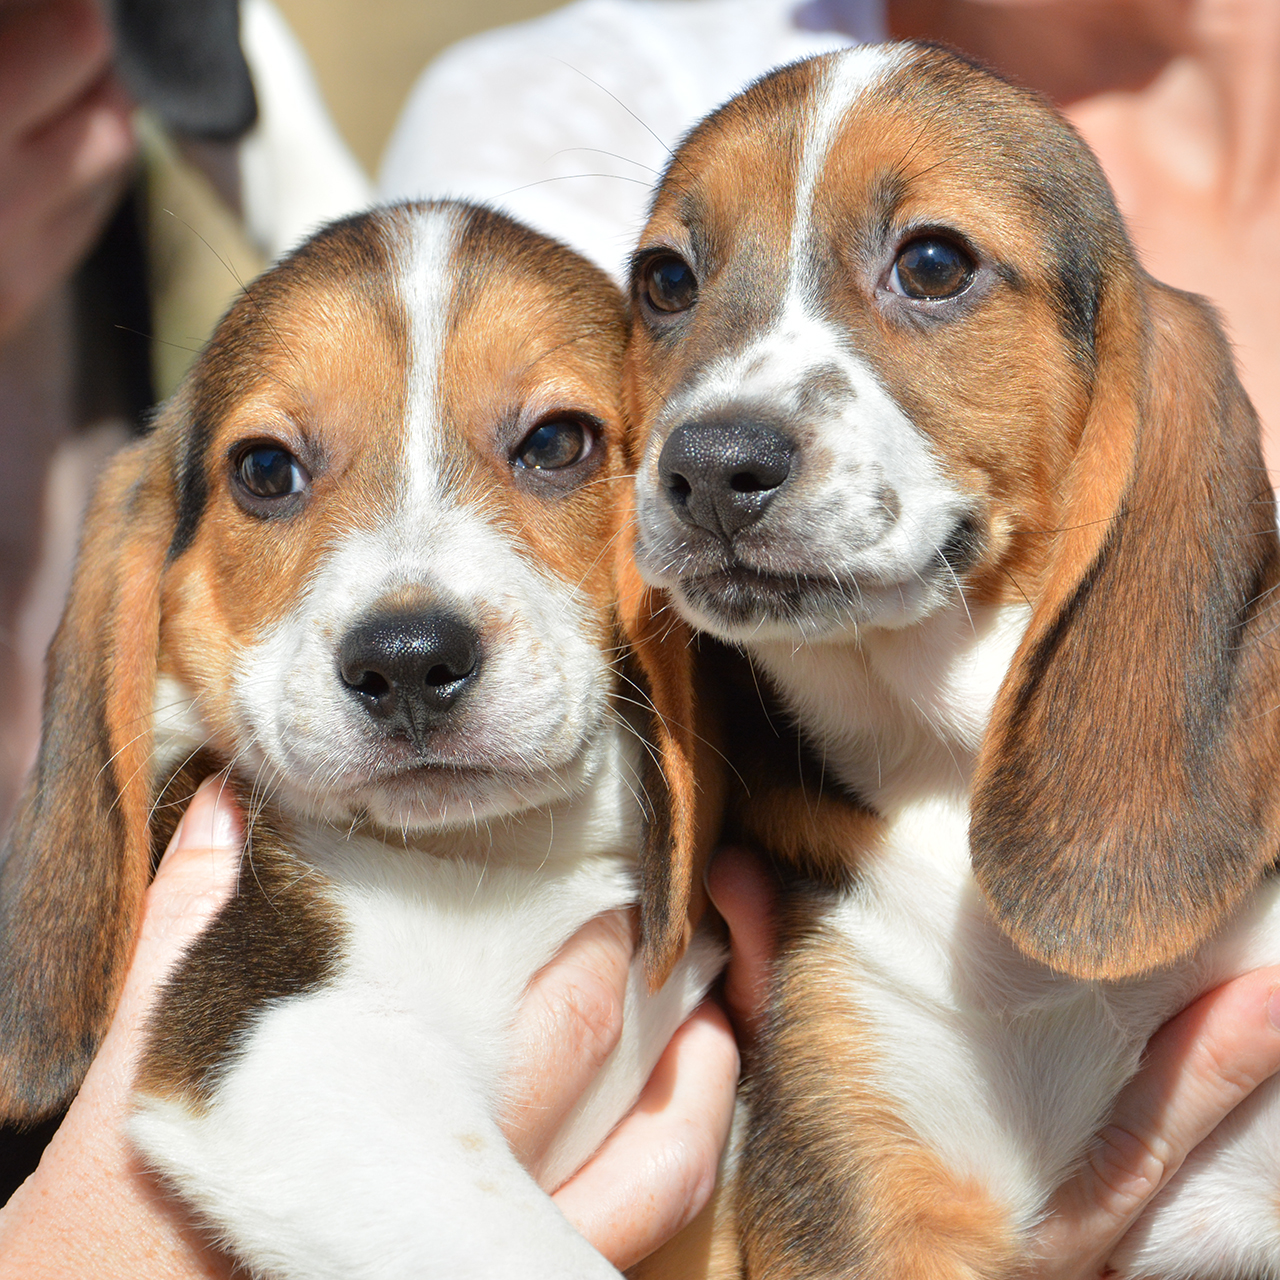 Two beagle puppies with brown and white markings.